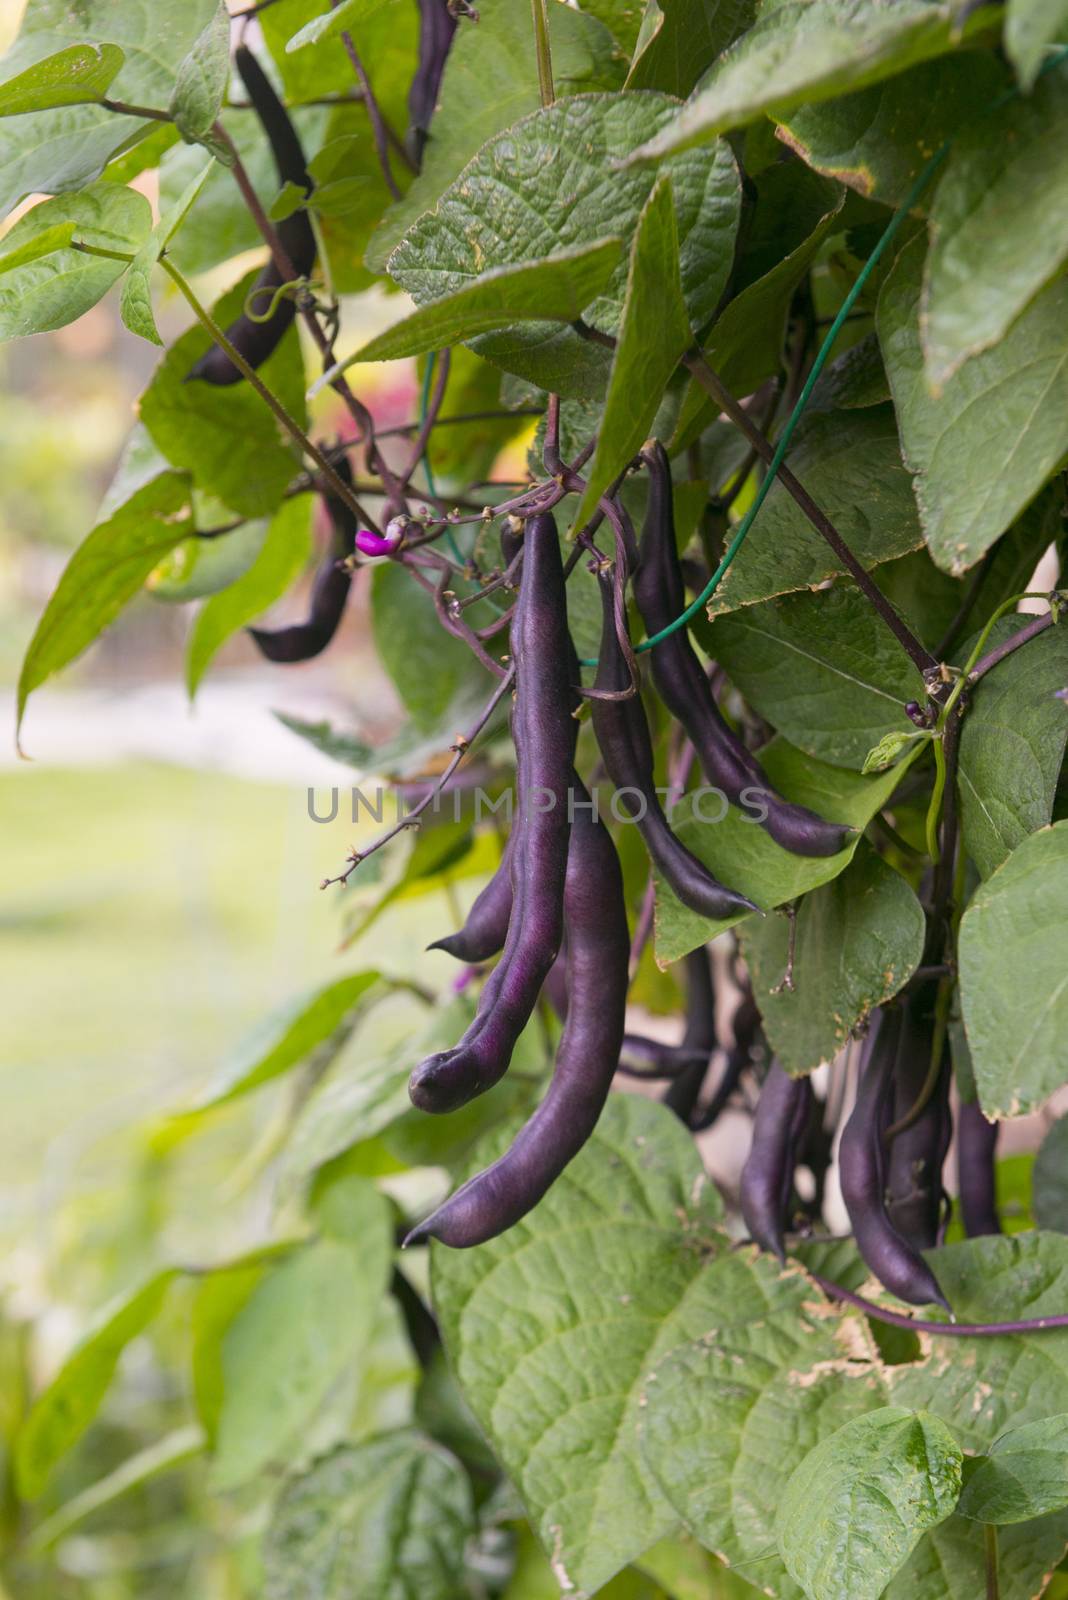 Special heirloom "purple" green beans by Njean